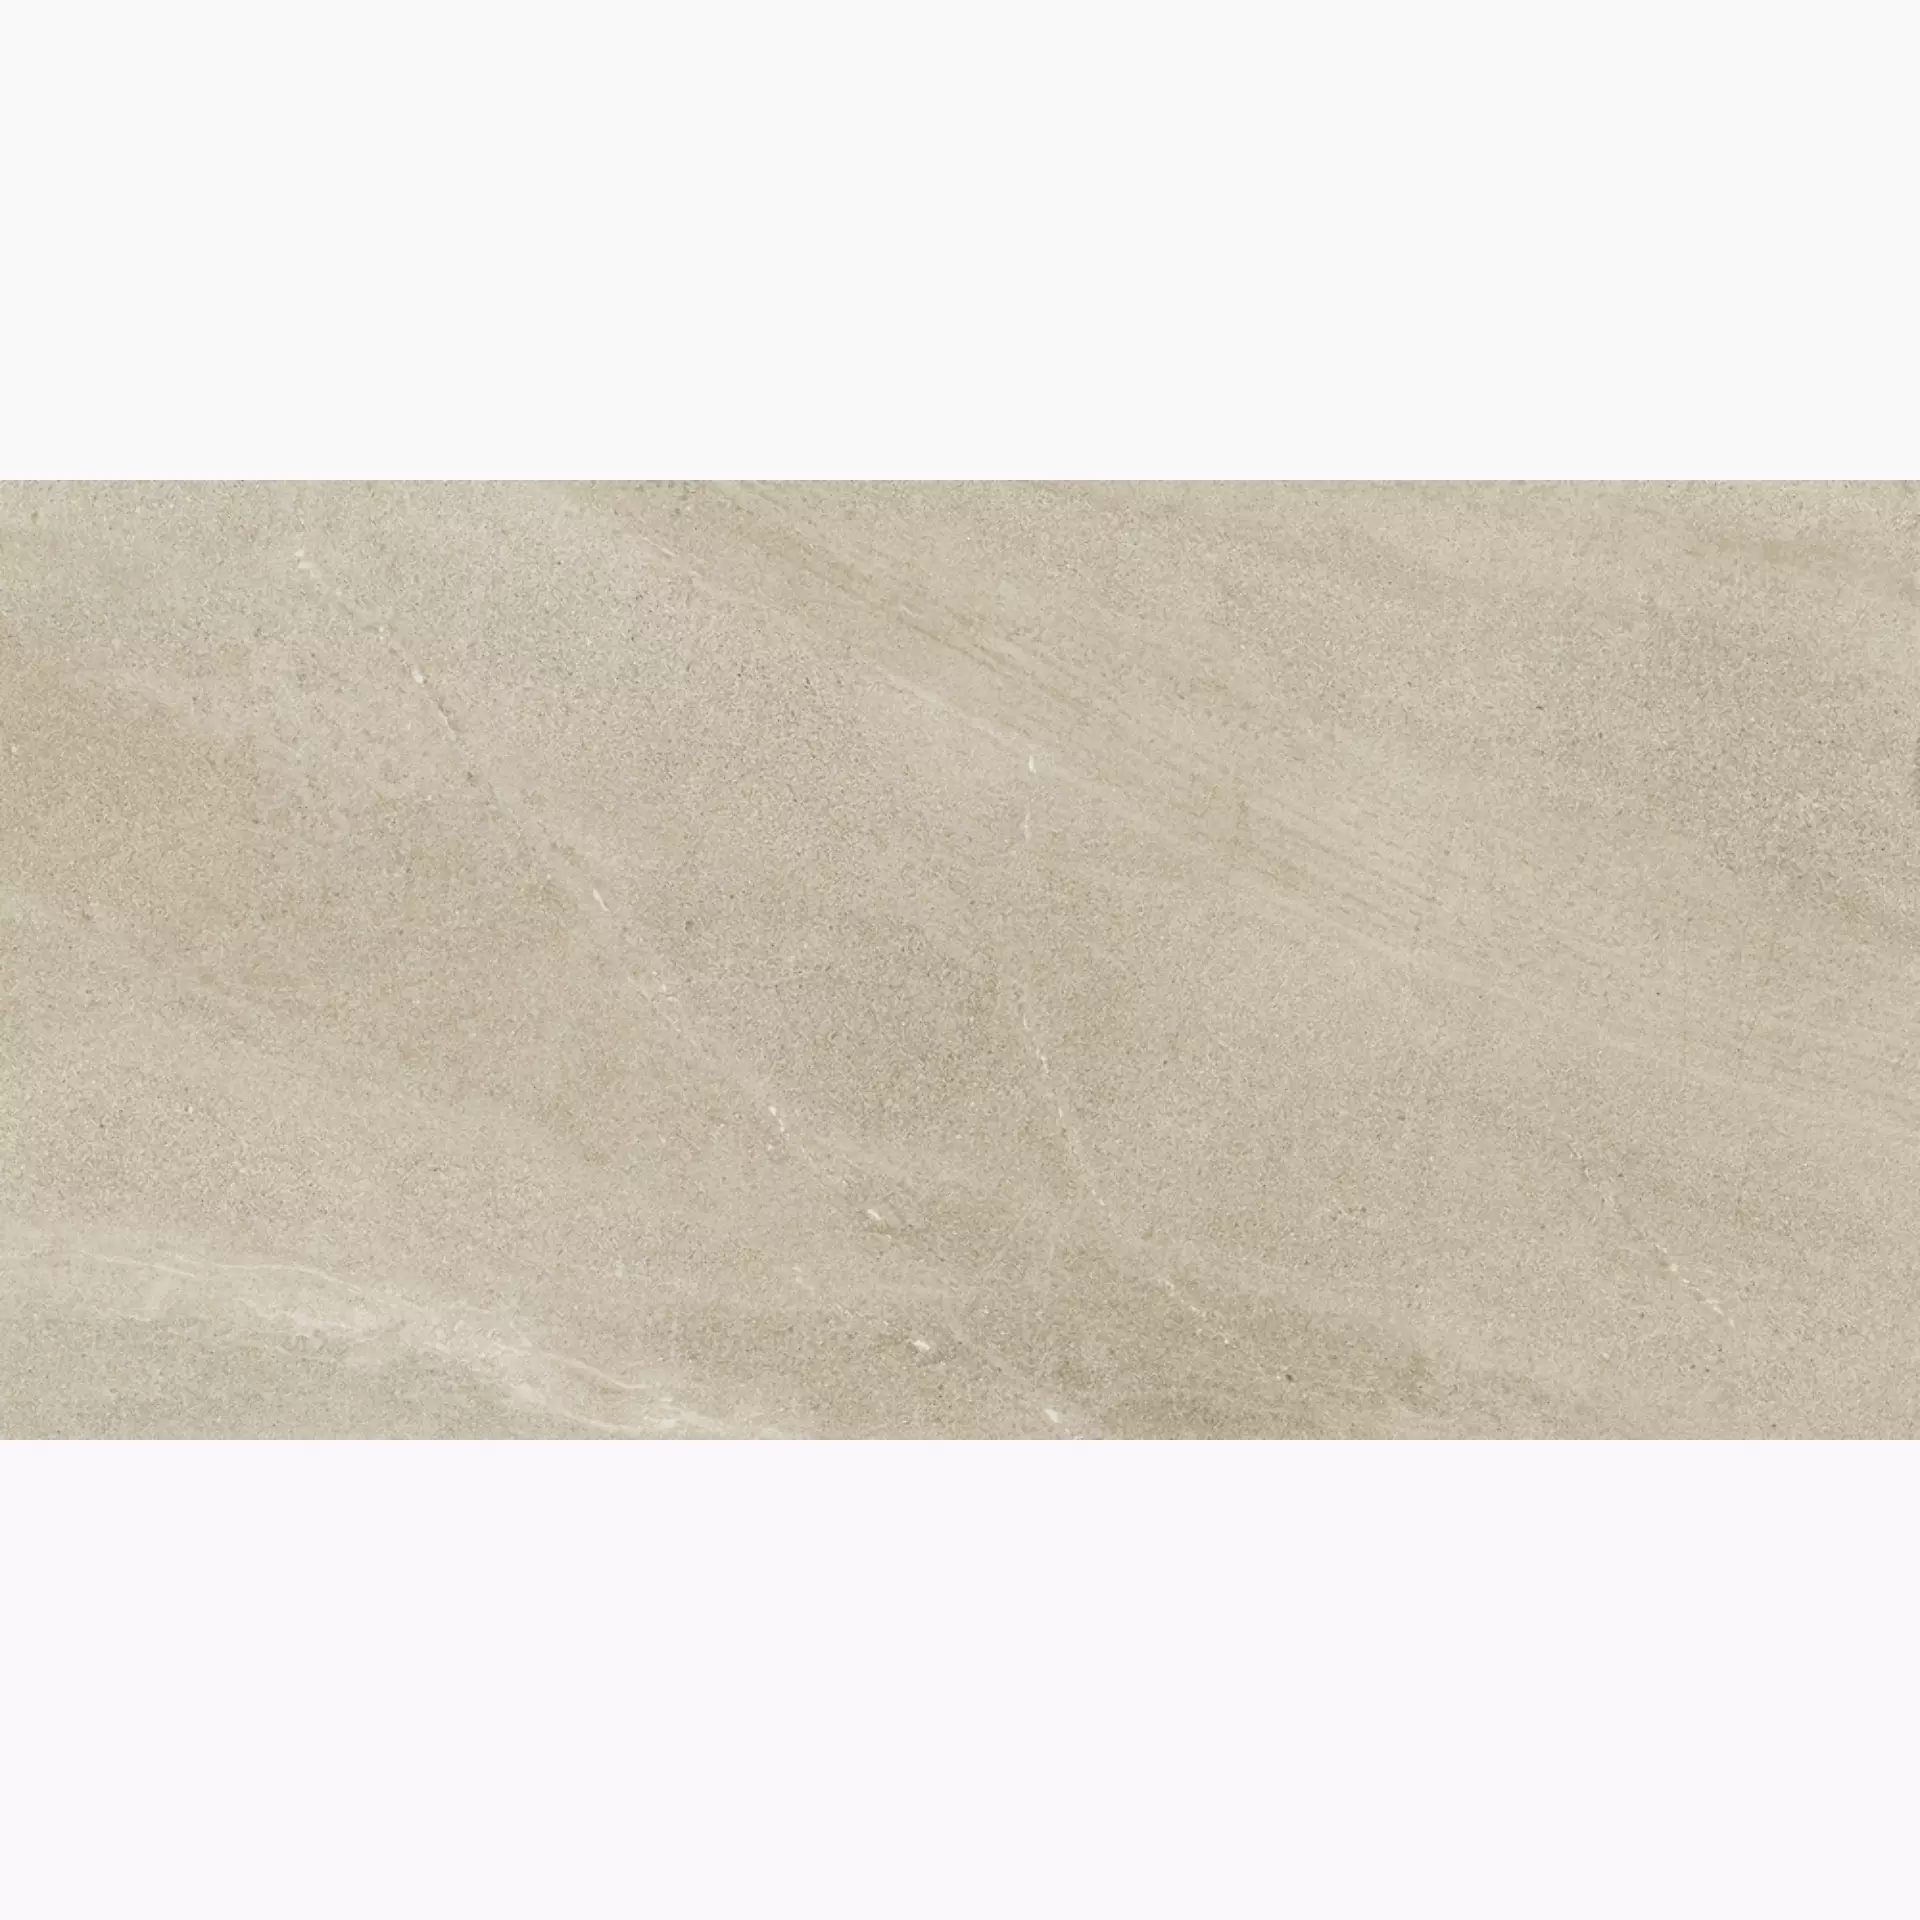 Cottodeste Limestone Amber Honed Protect EGXLSH0 60x120cm rectified 14mm